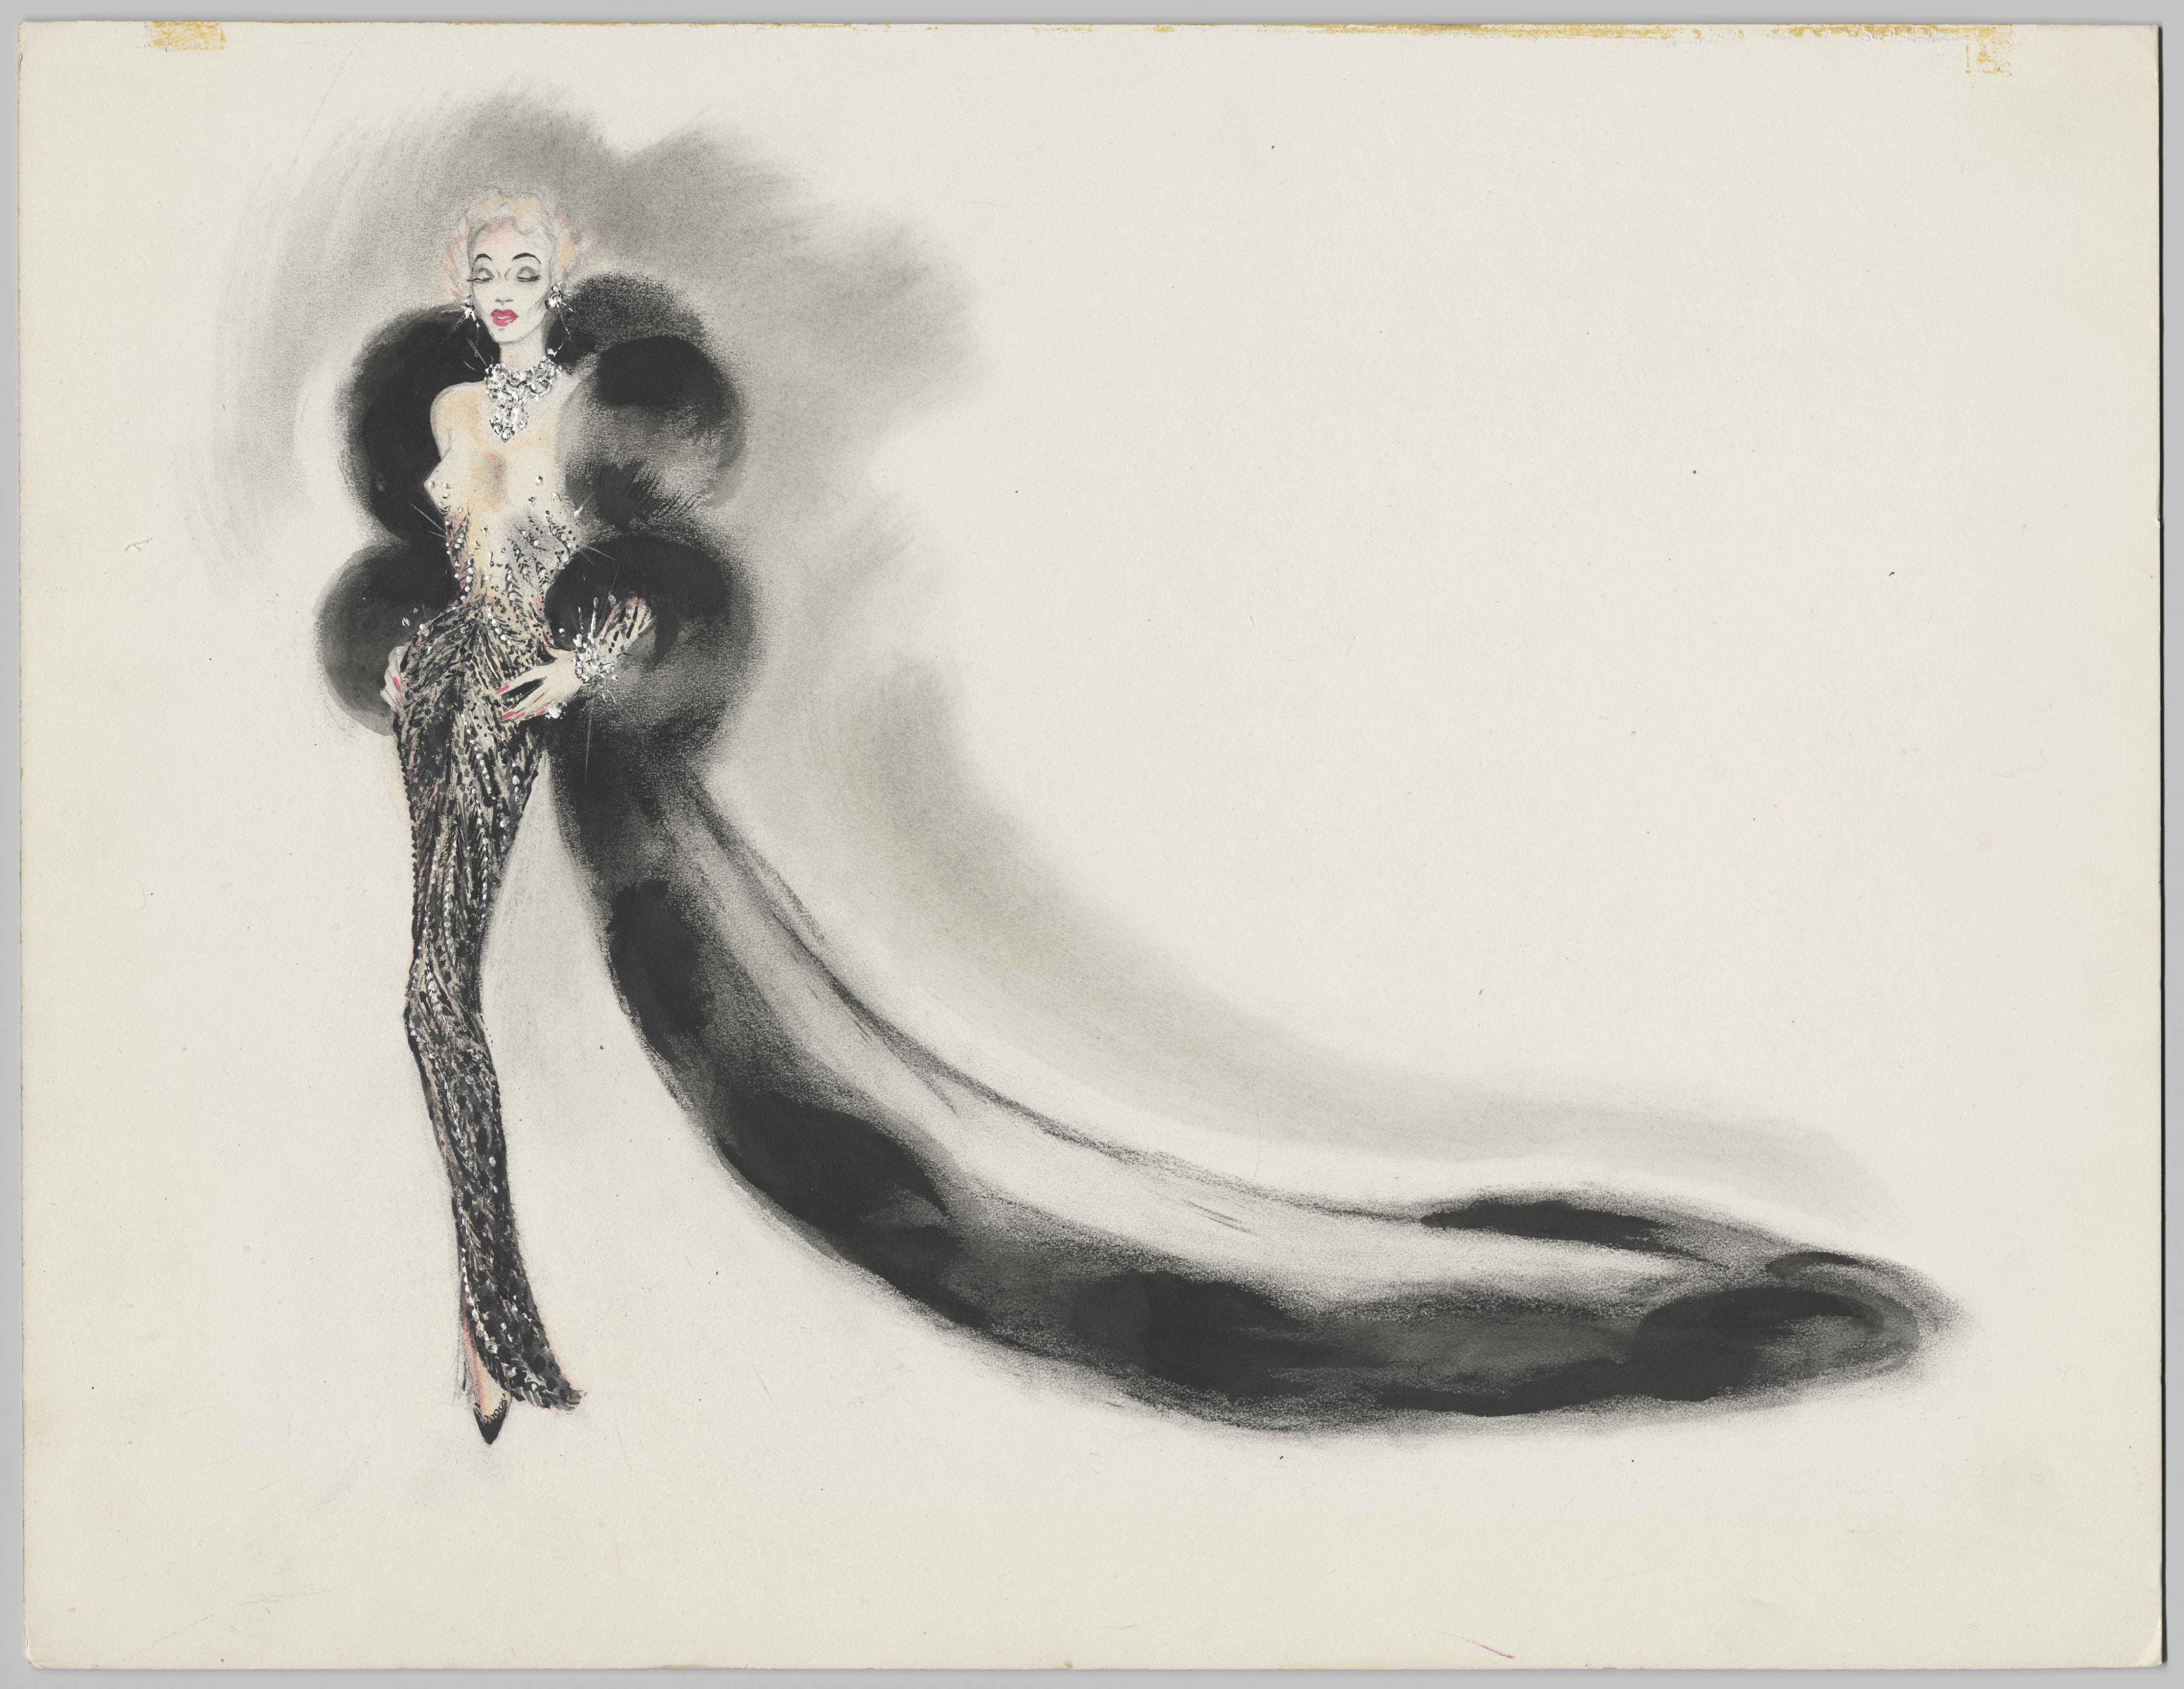 Costume design of a black show dress with rhinestones and sequins, including coat and fur trimming, Los Angeles, ca. 1953